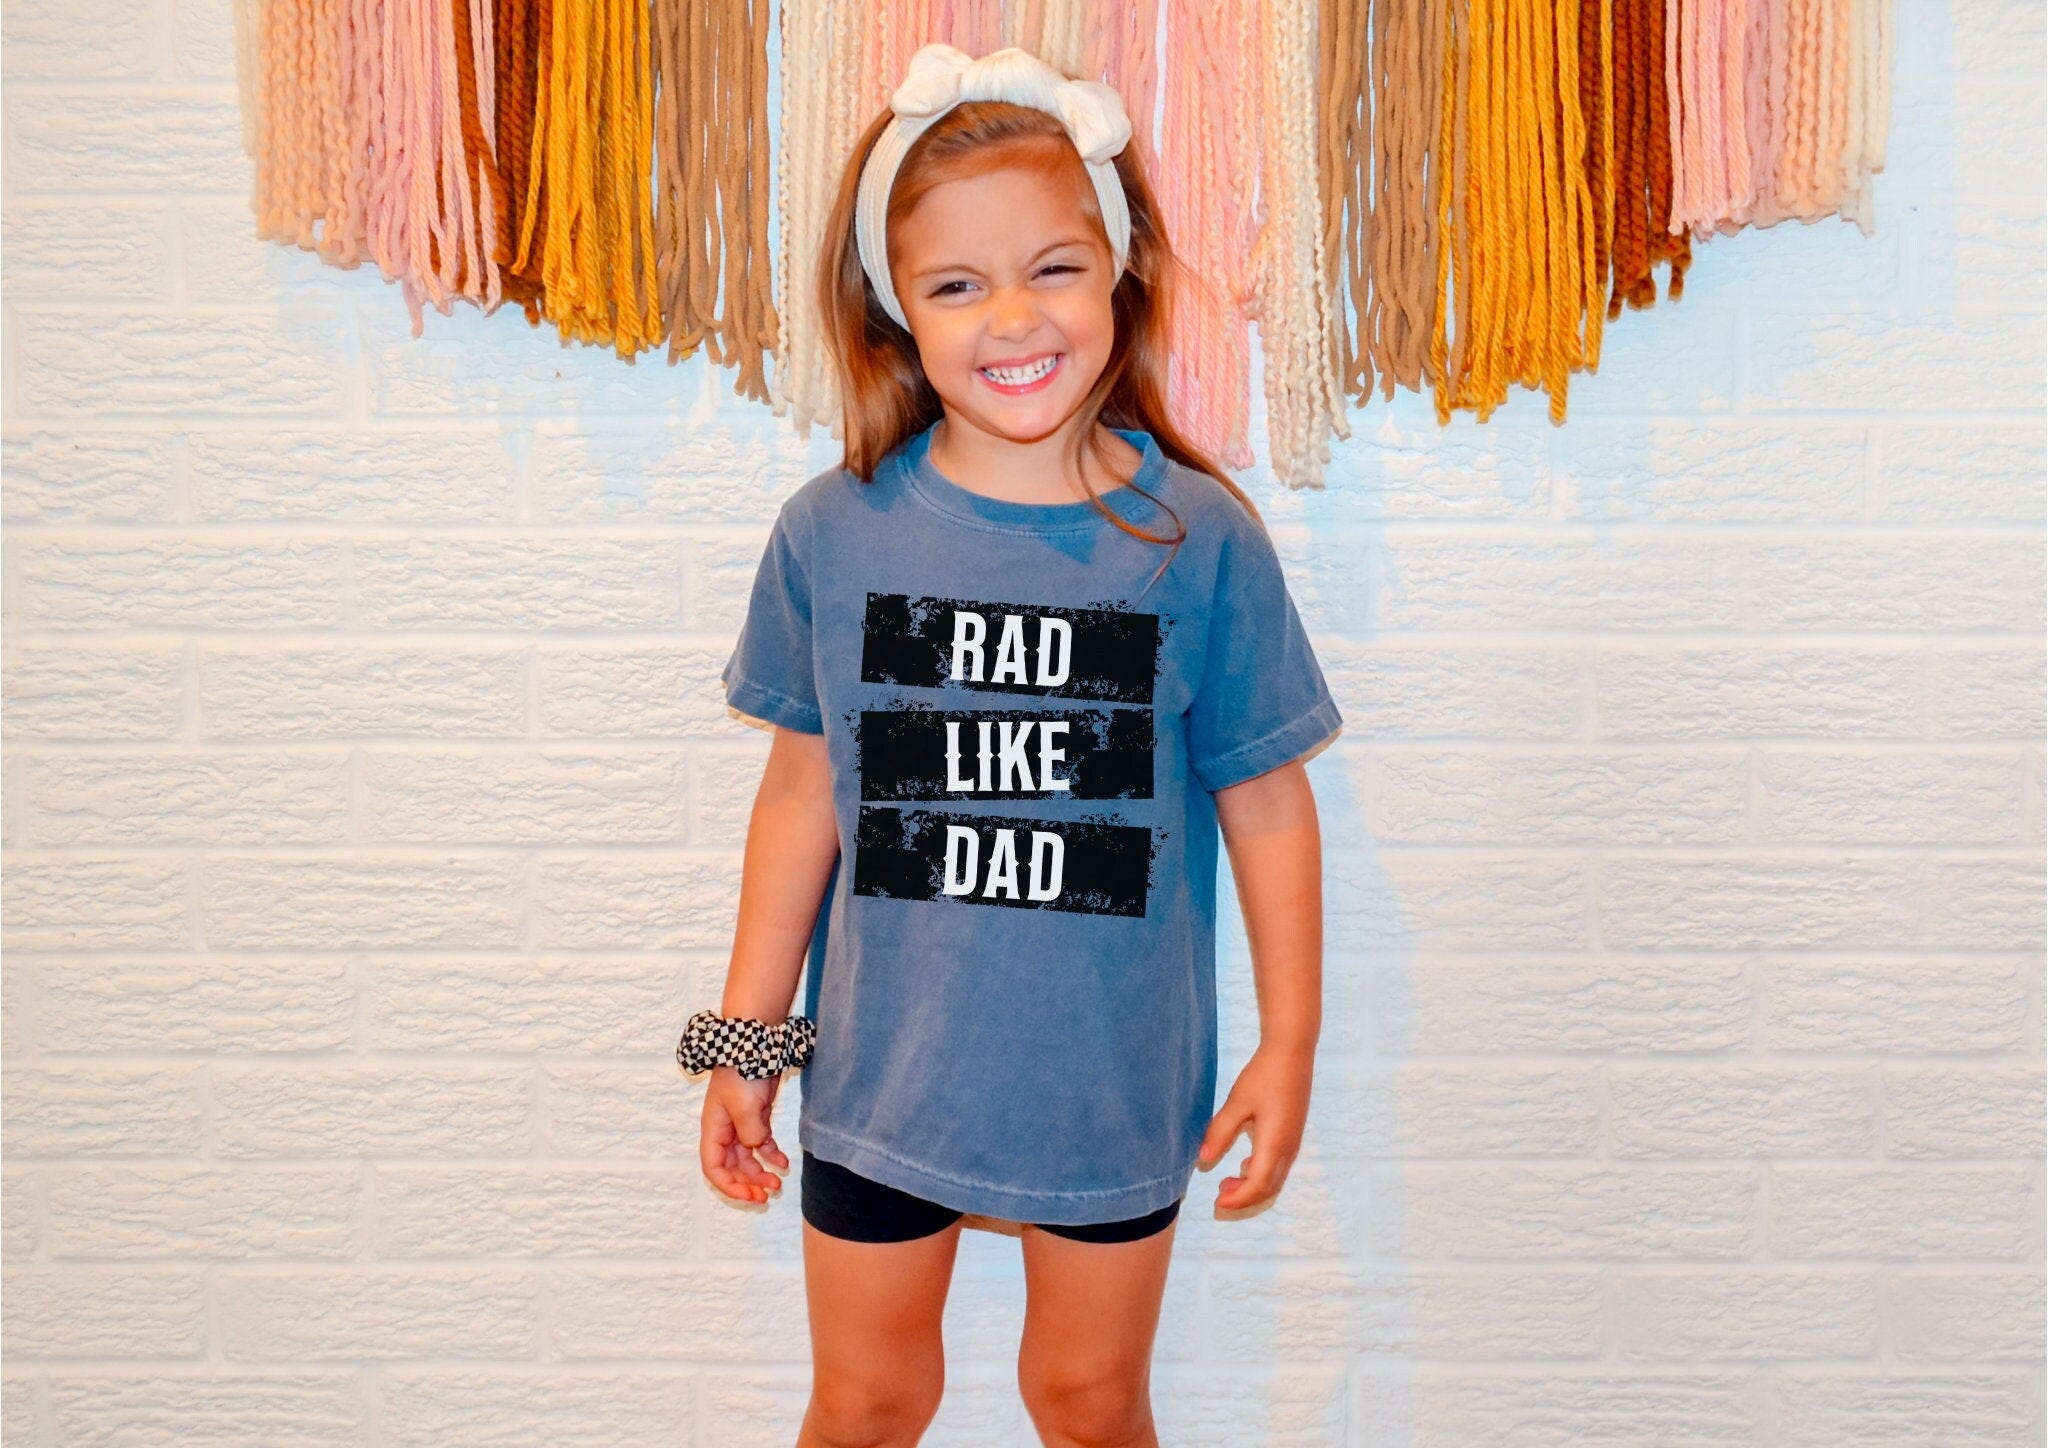 Kids Rad Like Dad Shirt, Edgy Grunge T-Shirt Boy or Girl, Rock n Roll Graphic Tee, Daddy & Me Matching Toddler Child Comfort Colors Skater